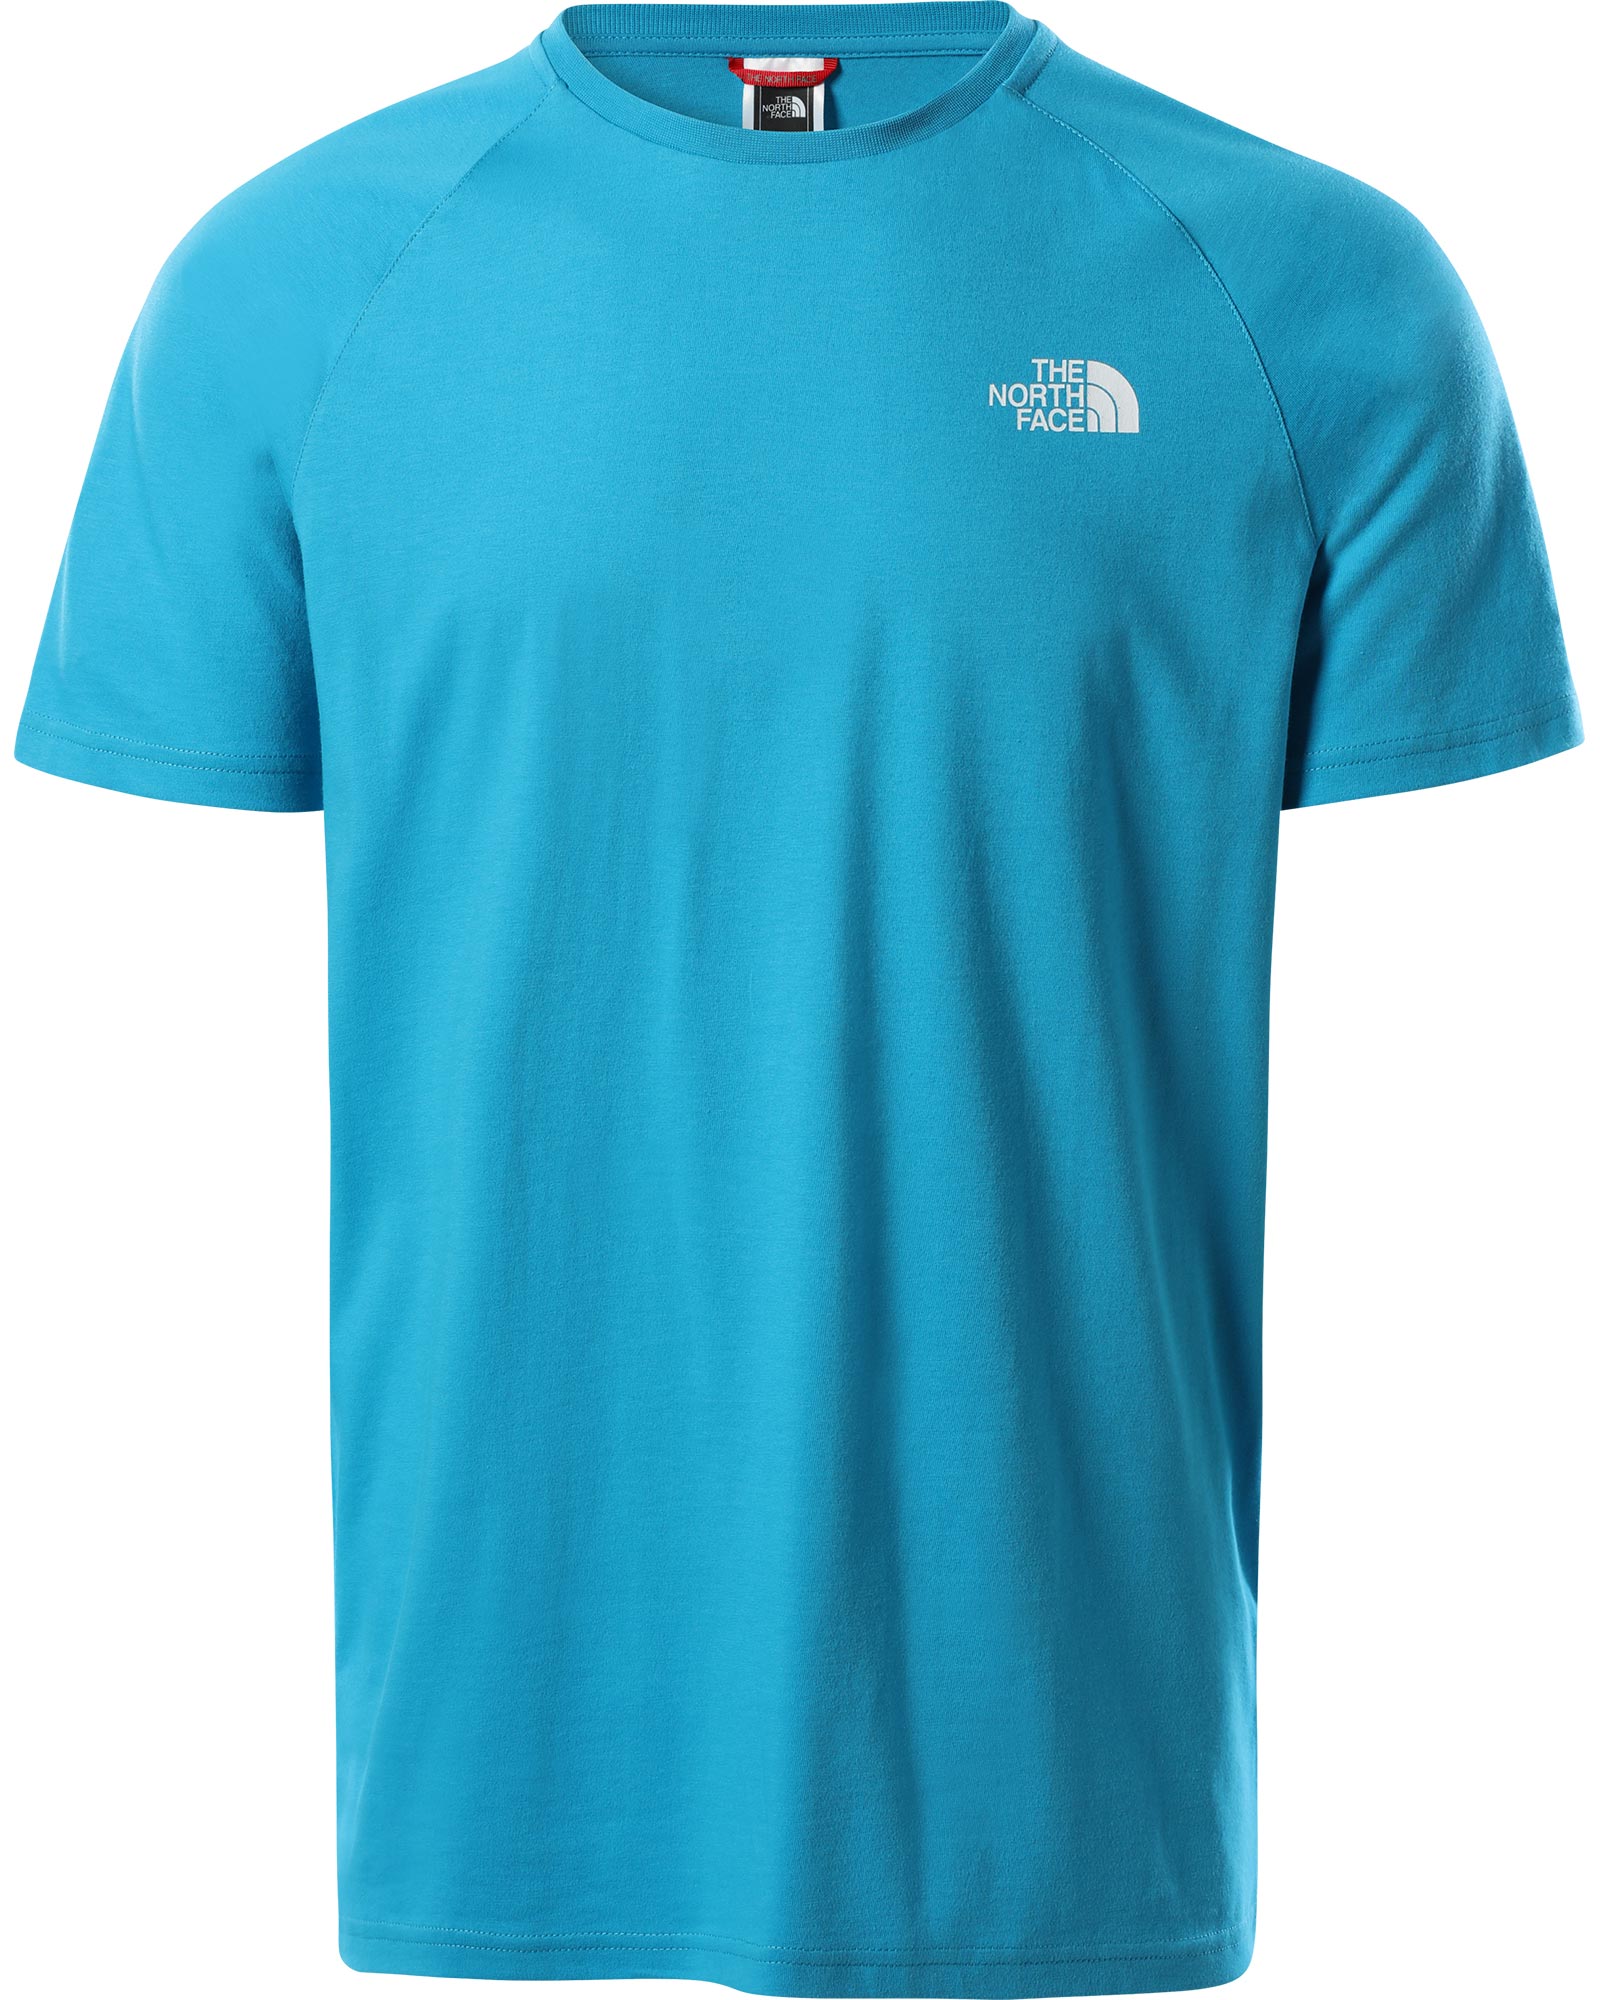 The North Face North Faces Men's T-Shirt